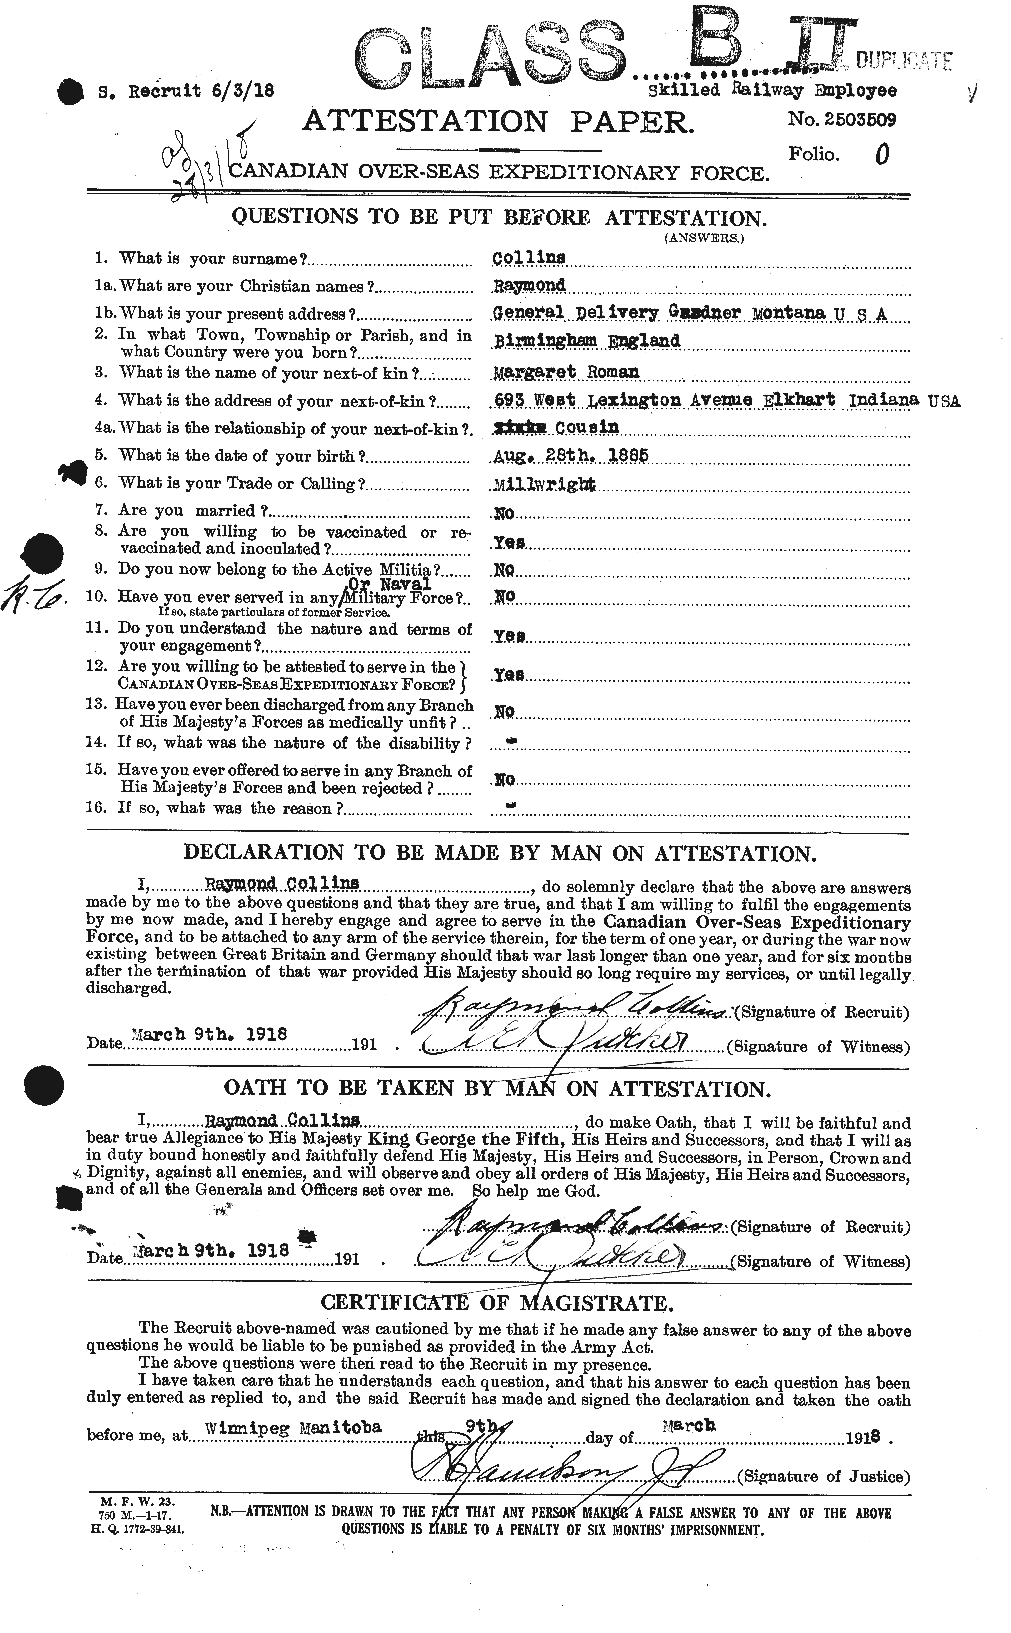 Personnel Records of the First World War - CEF 069289a